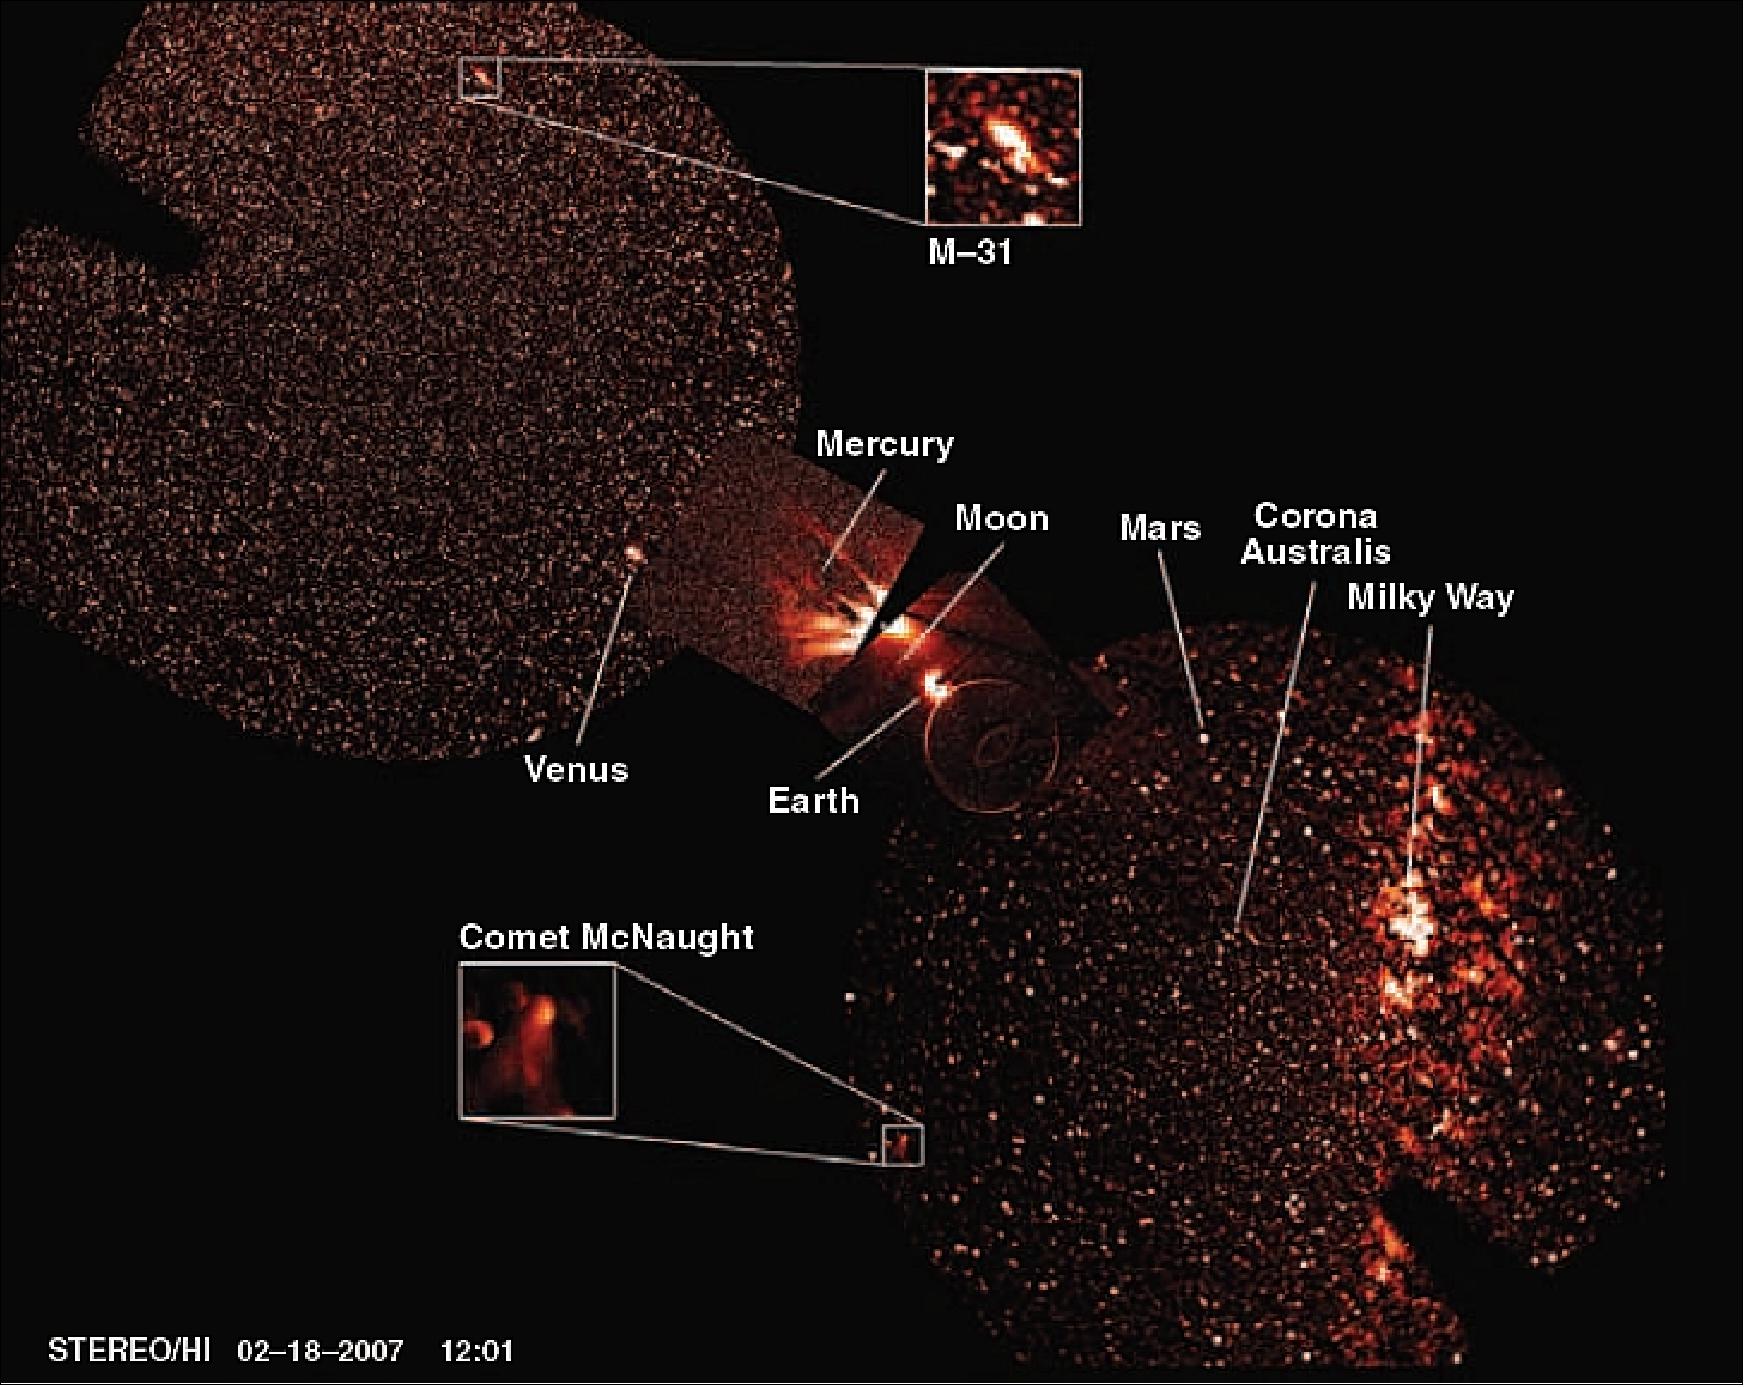 Figure 40: The combined images from all the STEREO HI instruments covering a wide swath of the sky—approximately 150º wide observed on Feb. 18, 2007 (image credit: NASA)